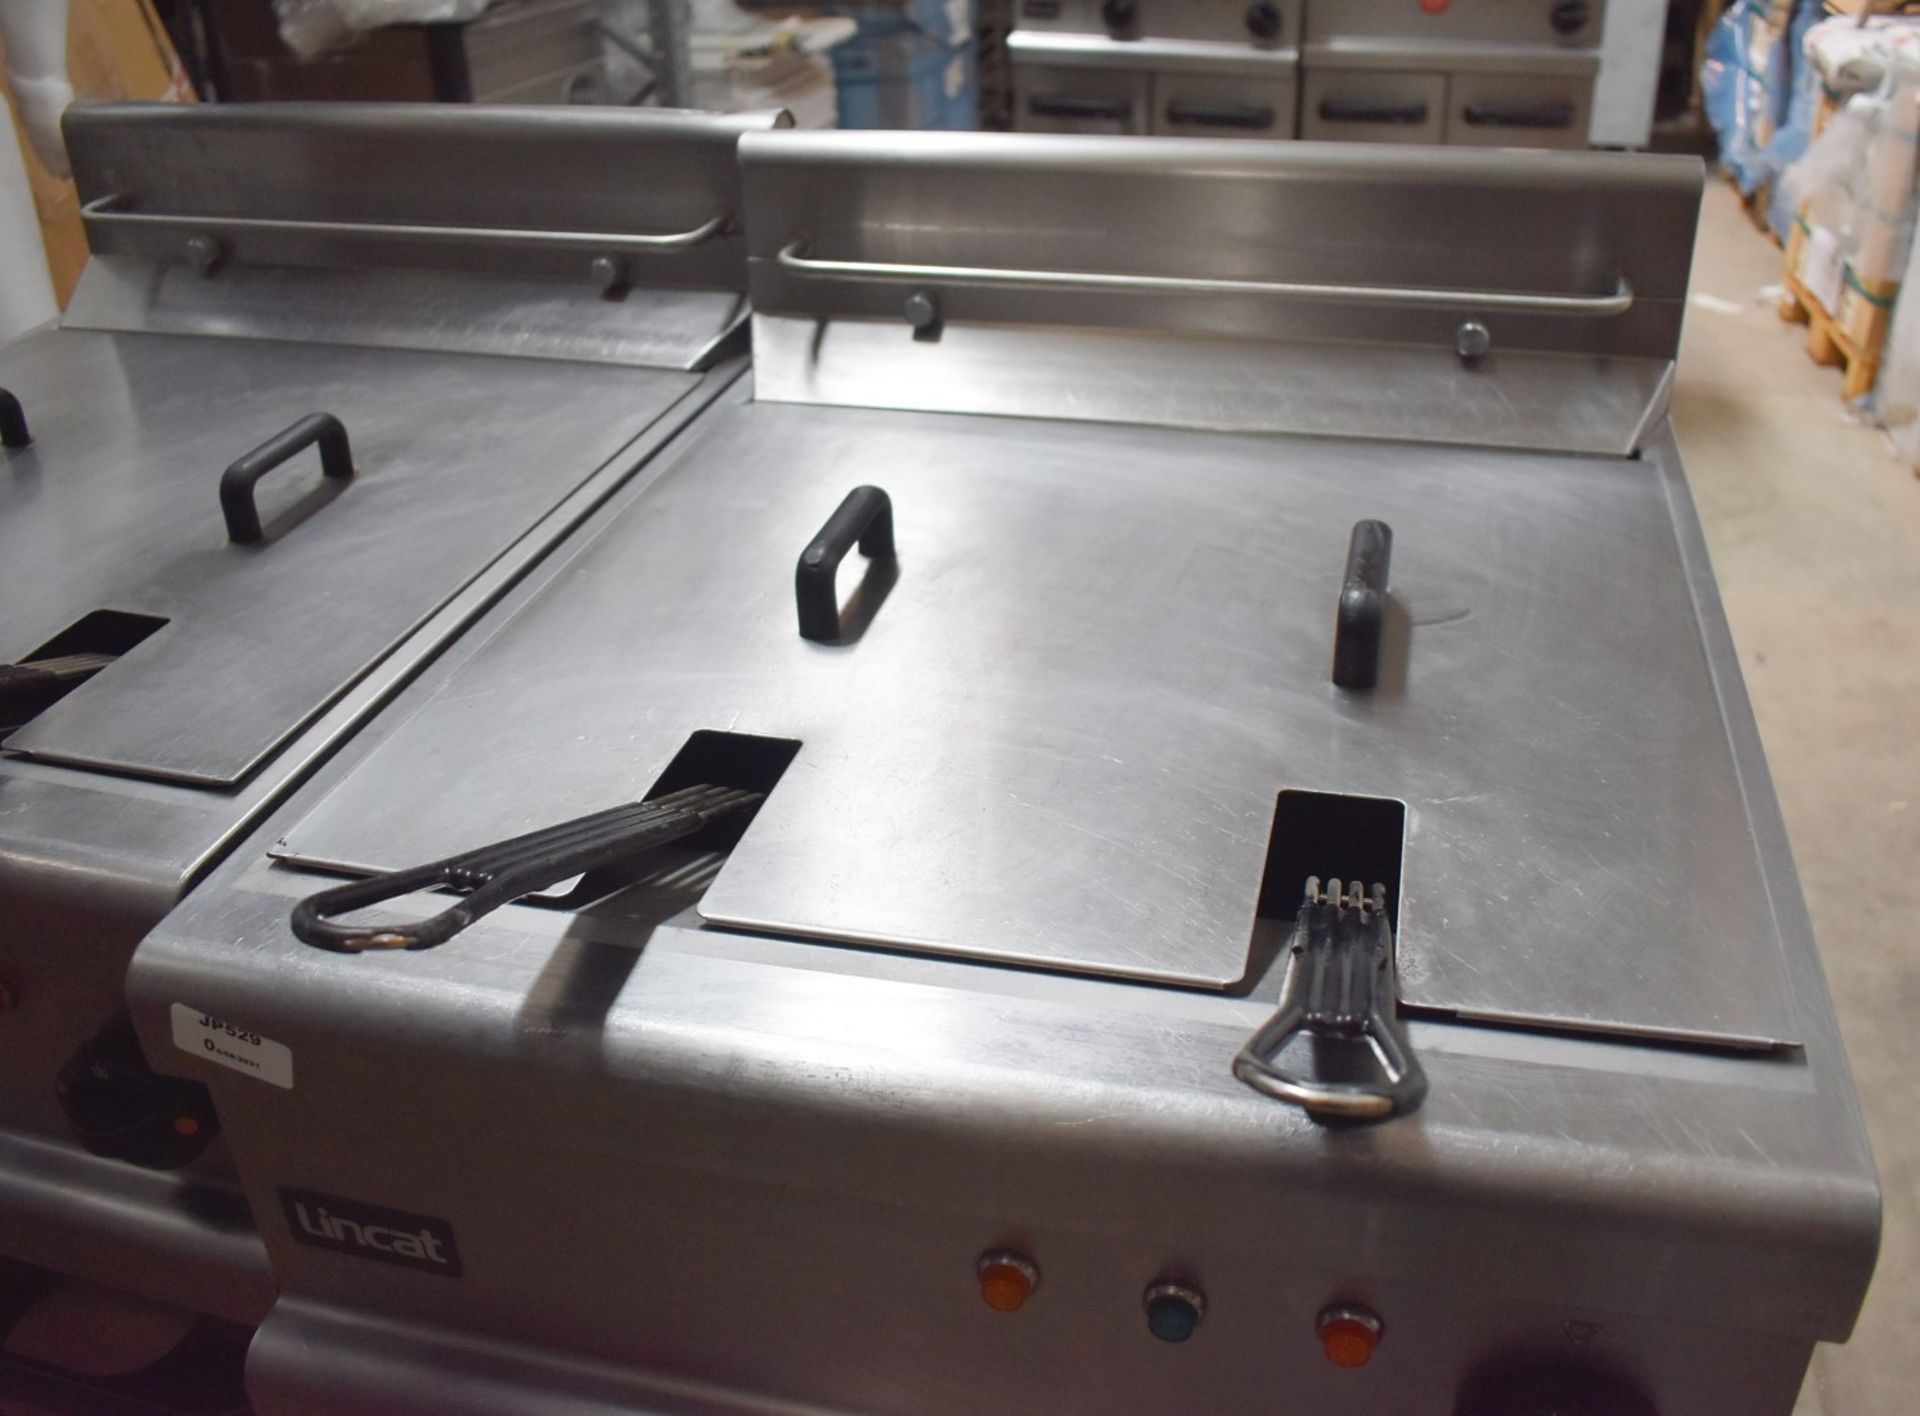 1 x Lincat Opus 700 OE7113 Single Large Tank Electric Fryer With Built In Filteration - 240V / 3PH P - Image 11 of 11